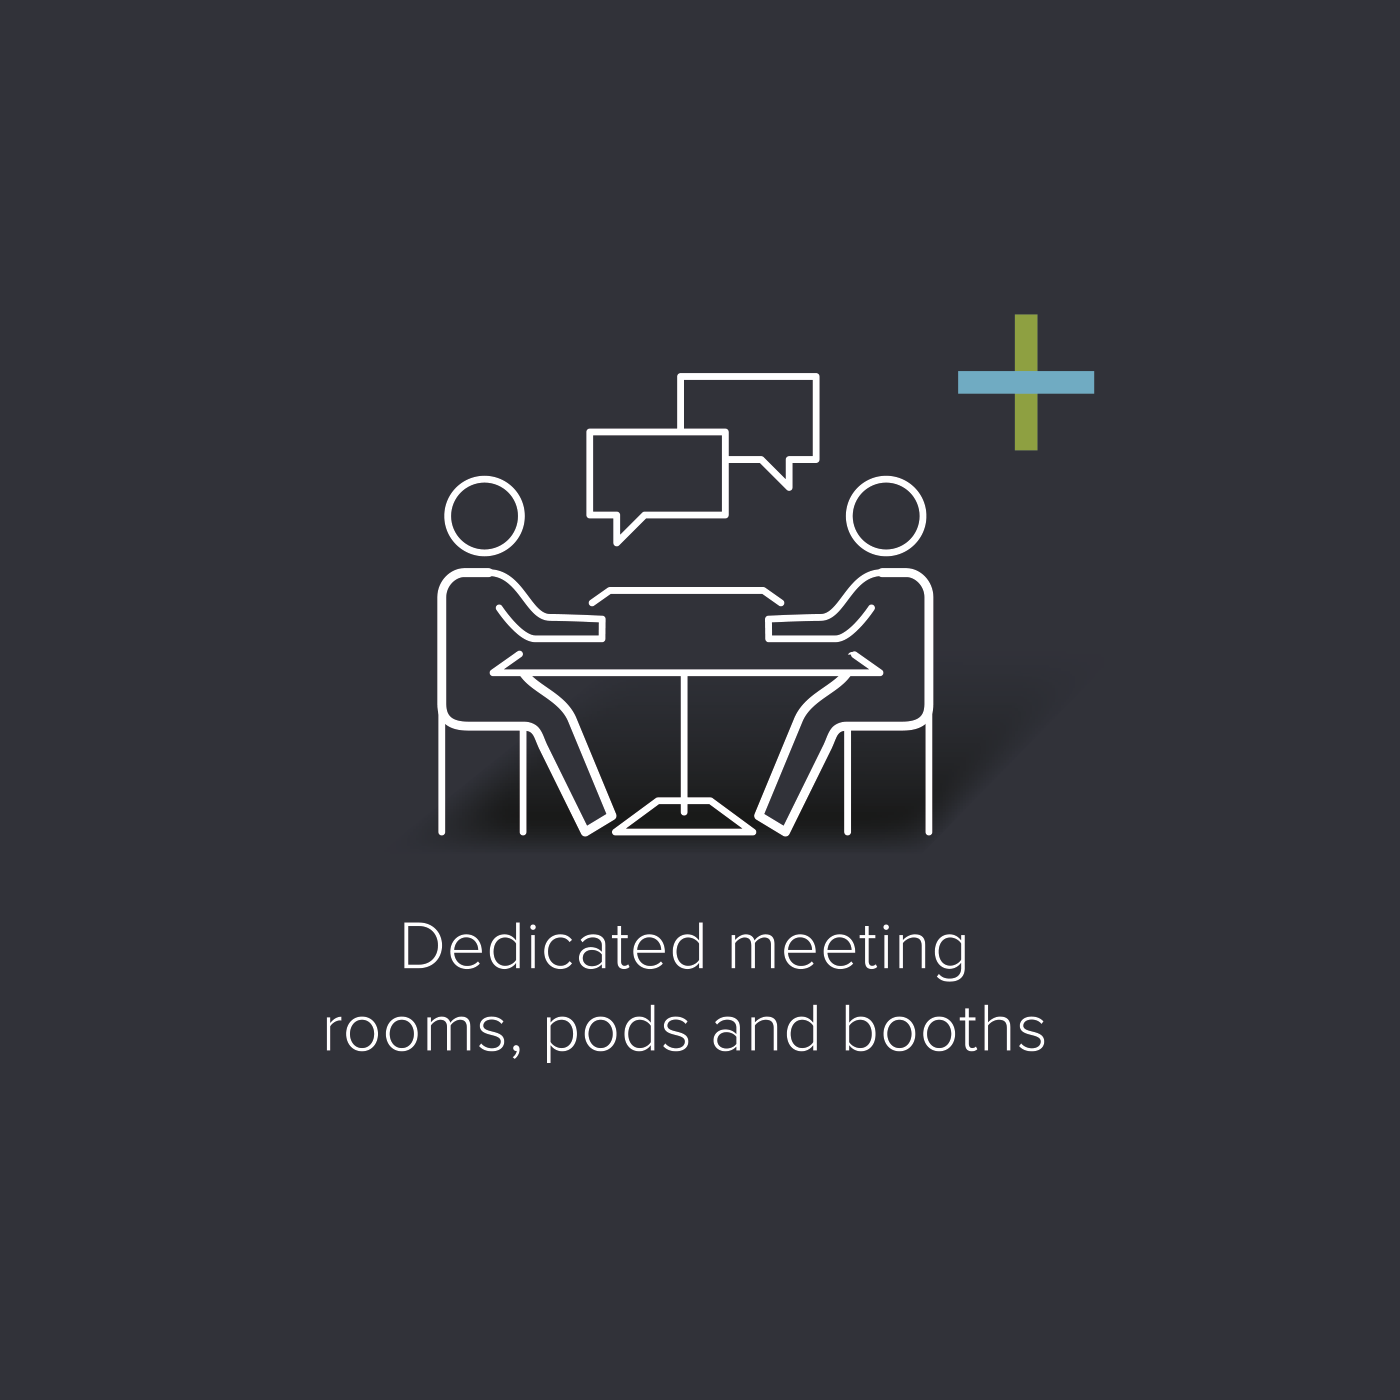 Dedicated meeting rooms, pods and booths